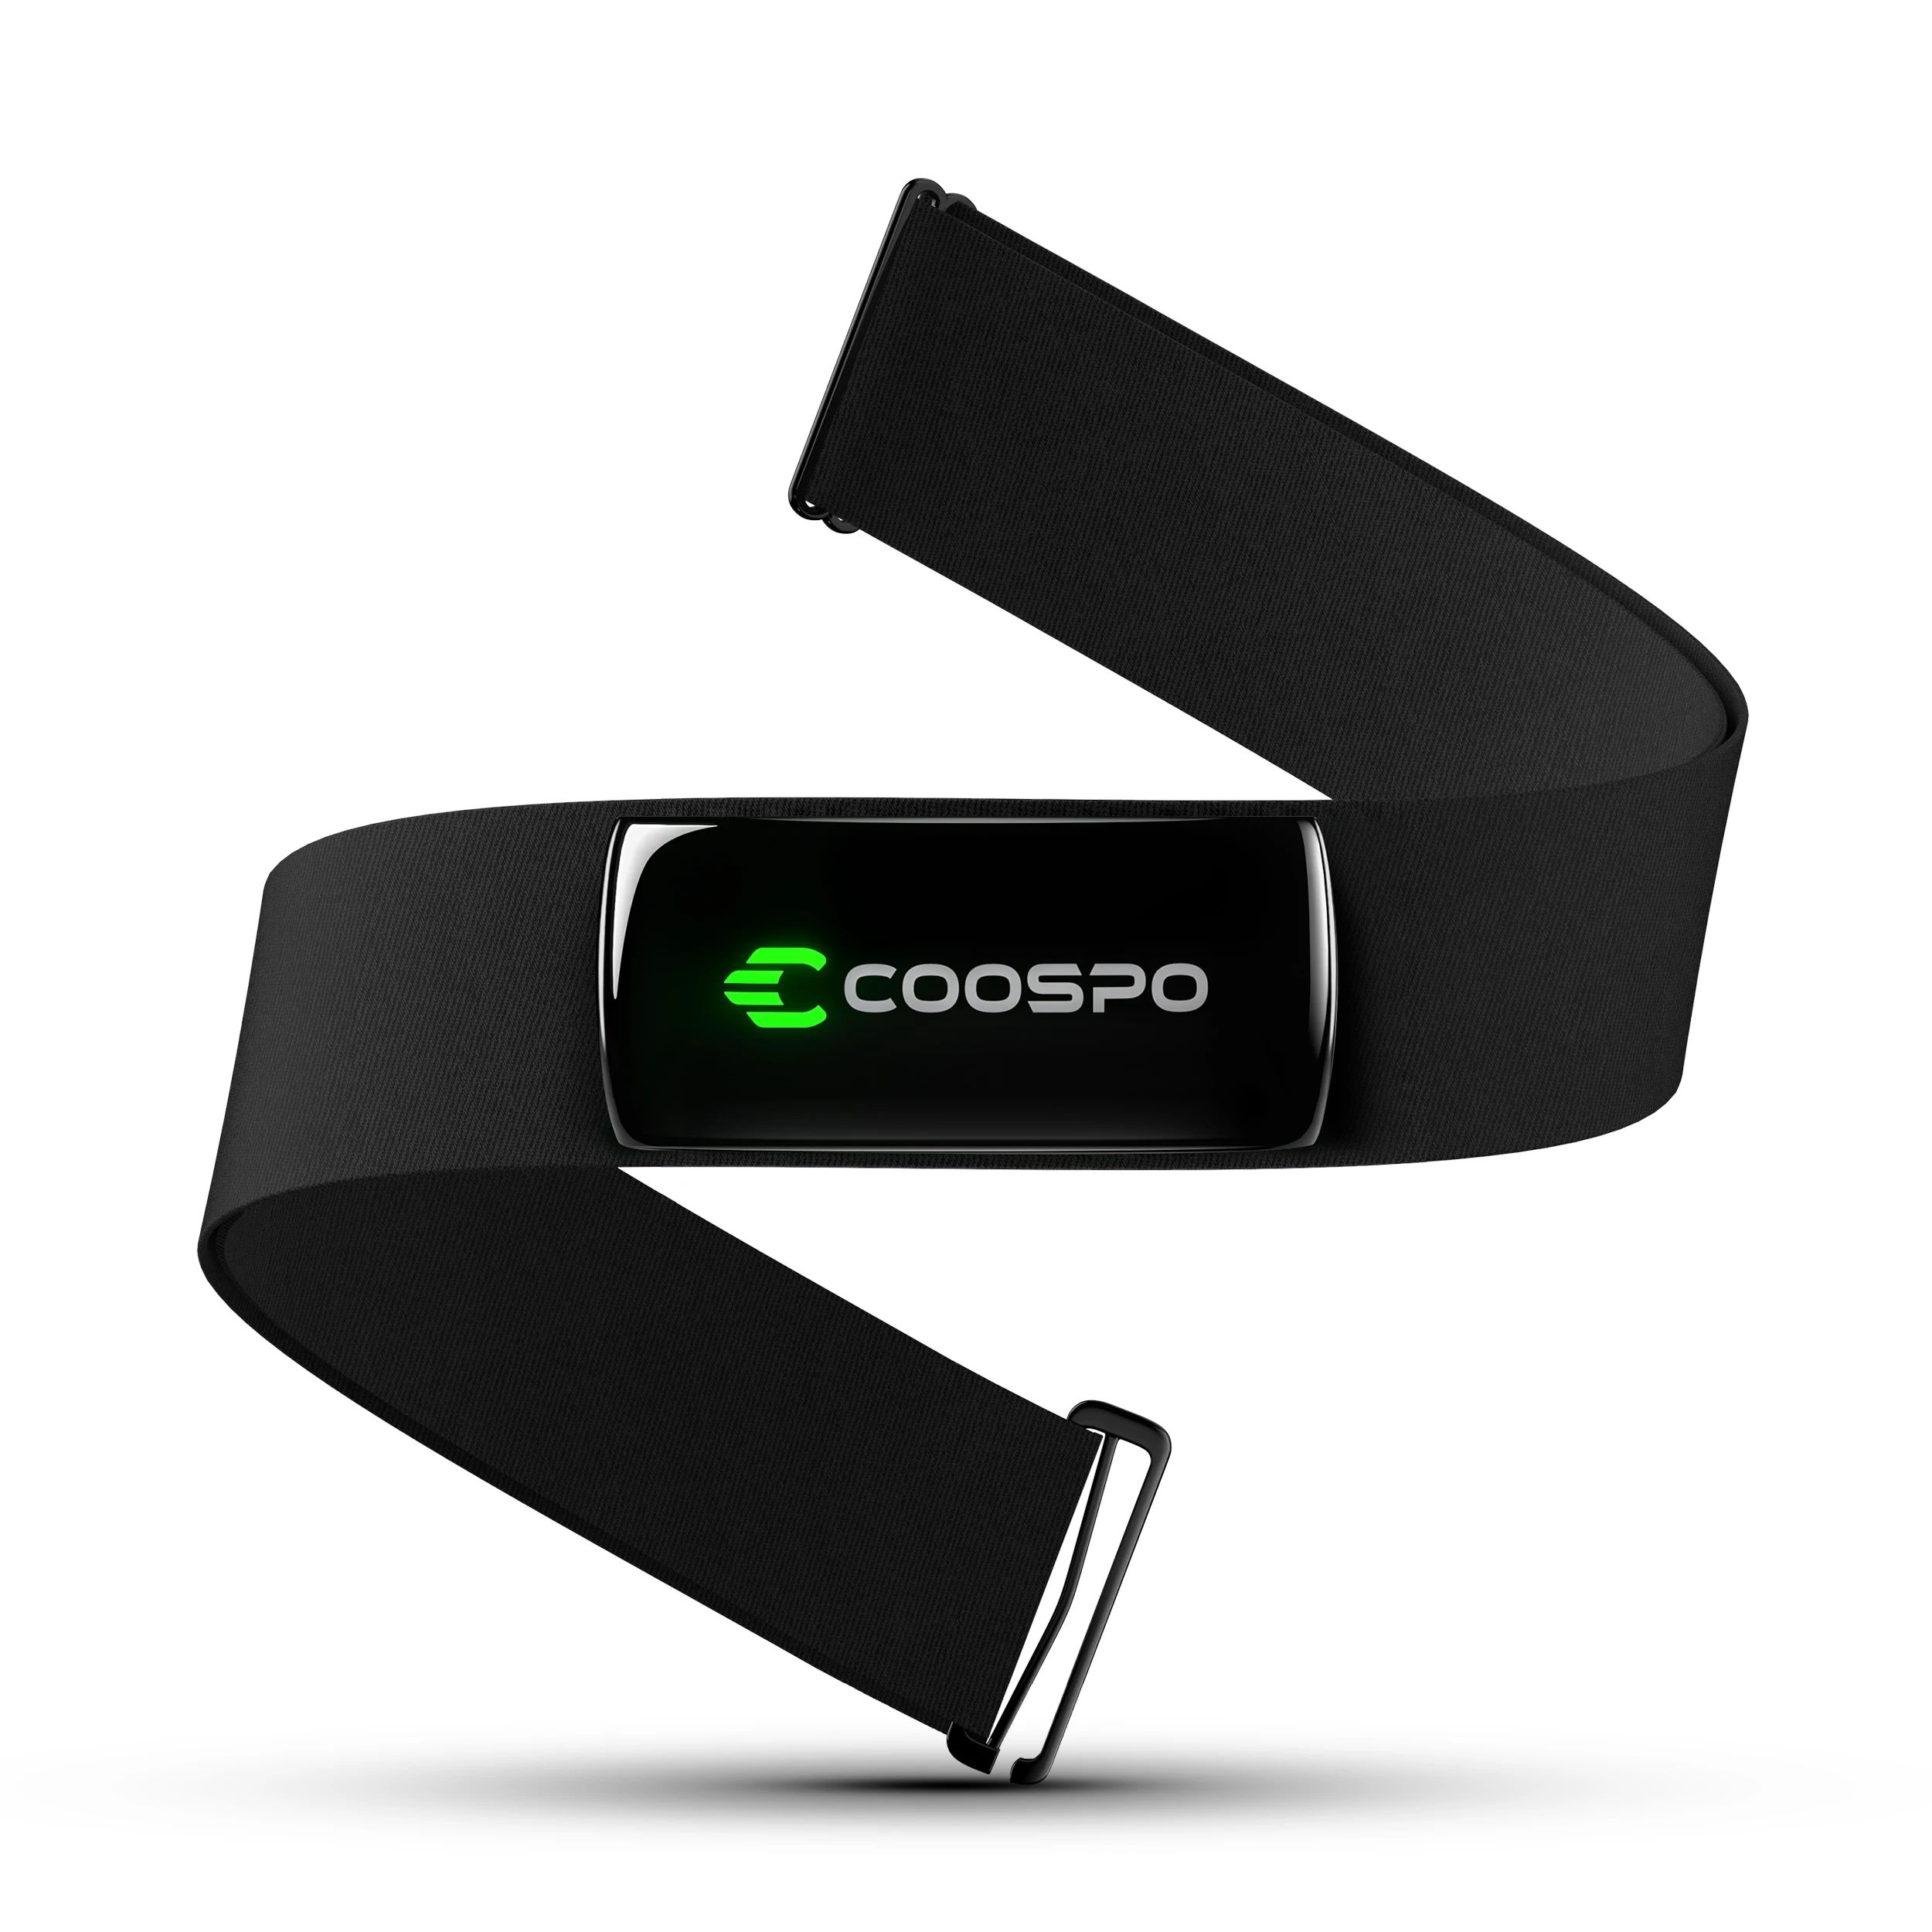 

COOSPO H9Z Rechargeable Heart Rate Monitor Chest Strap Bluetooth5.0 ANT+ HR Sensor HRM IP67Waterproof Use for Garmin wahoo Zwift